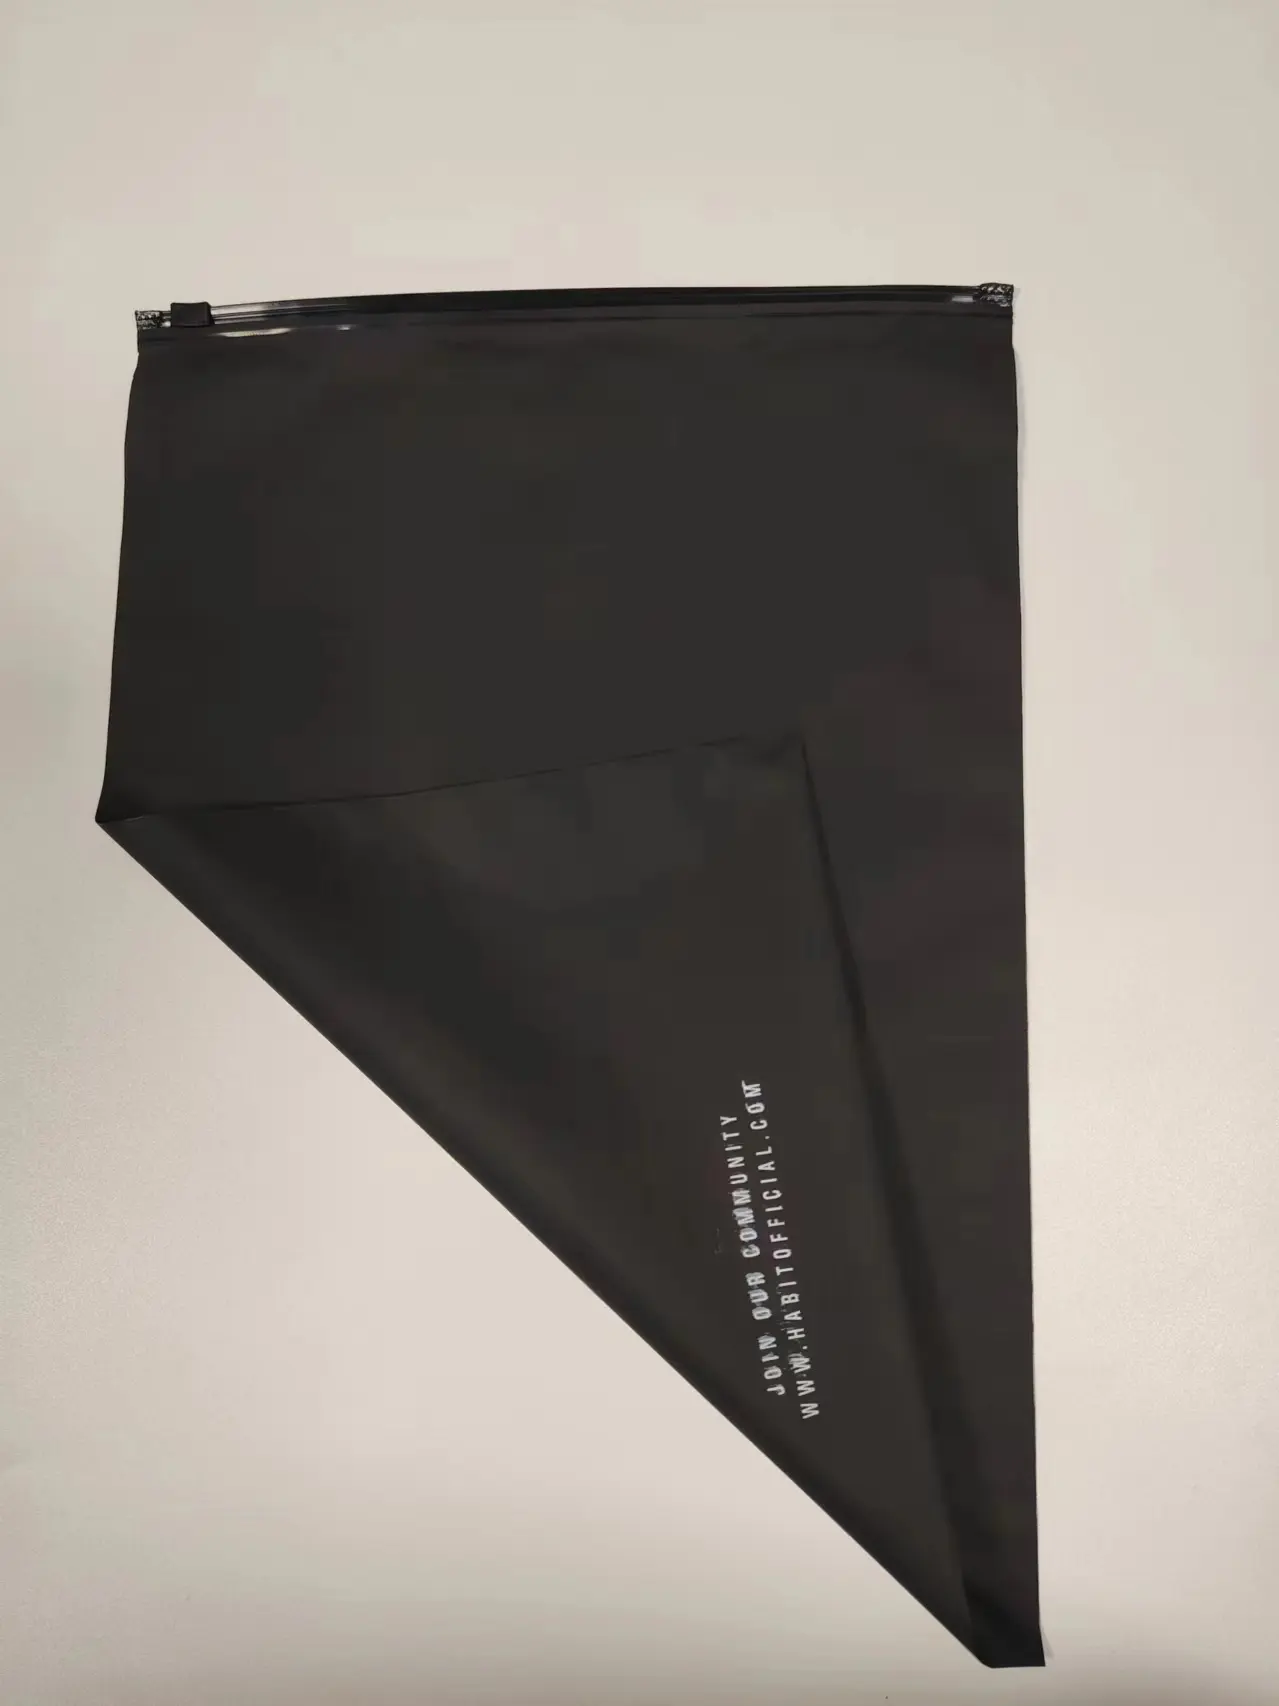 Custom Matte black Frosted plastic bags Zipper bags for Clothing Packaging T Shirt Swimwear bags